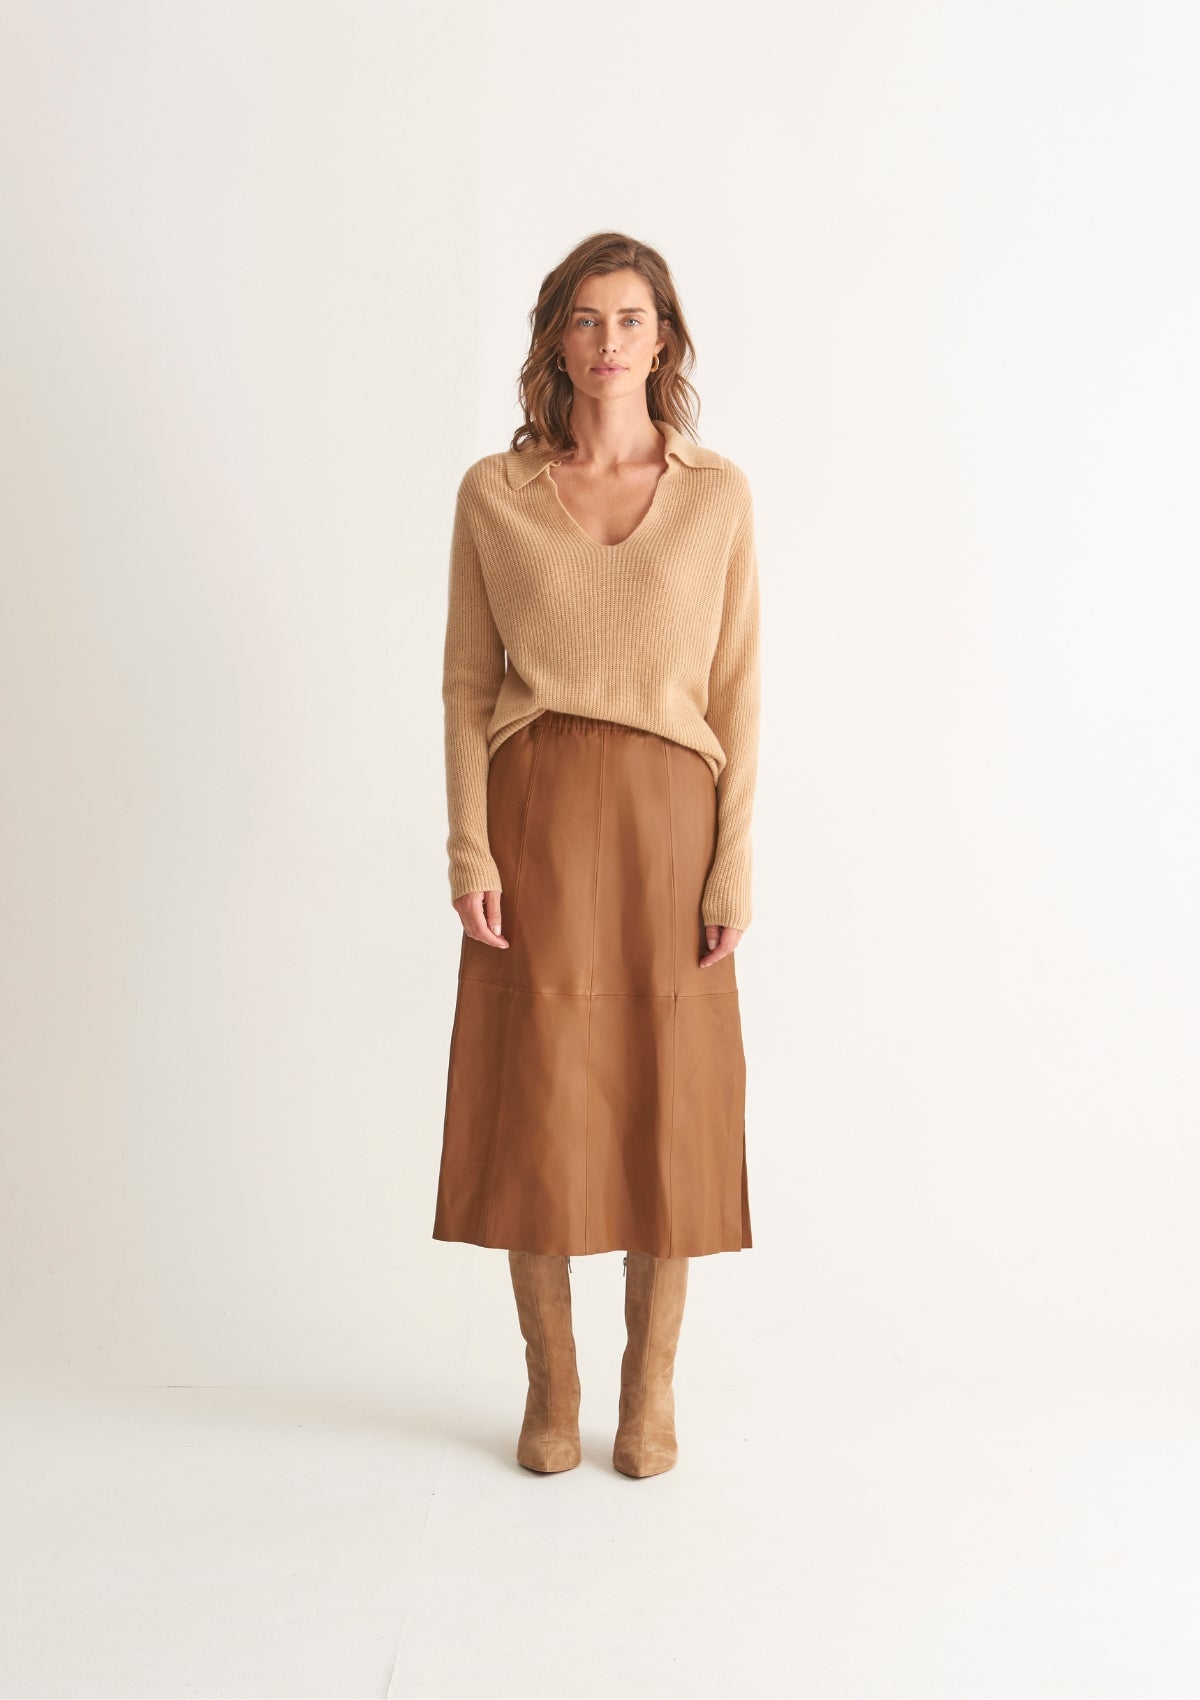 Cashmere Open Collar Sweater in Toffee